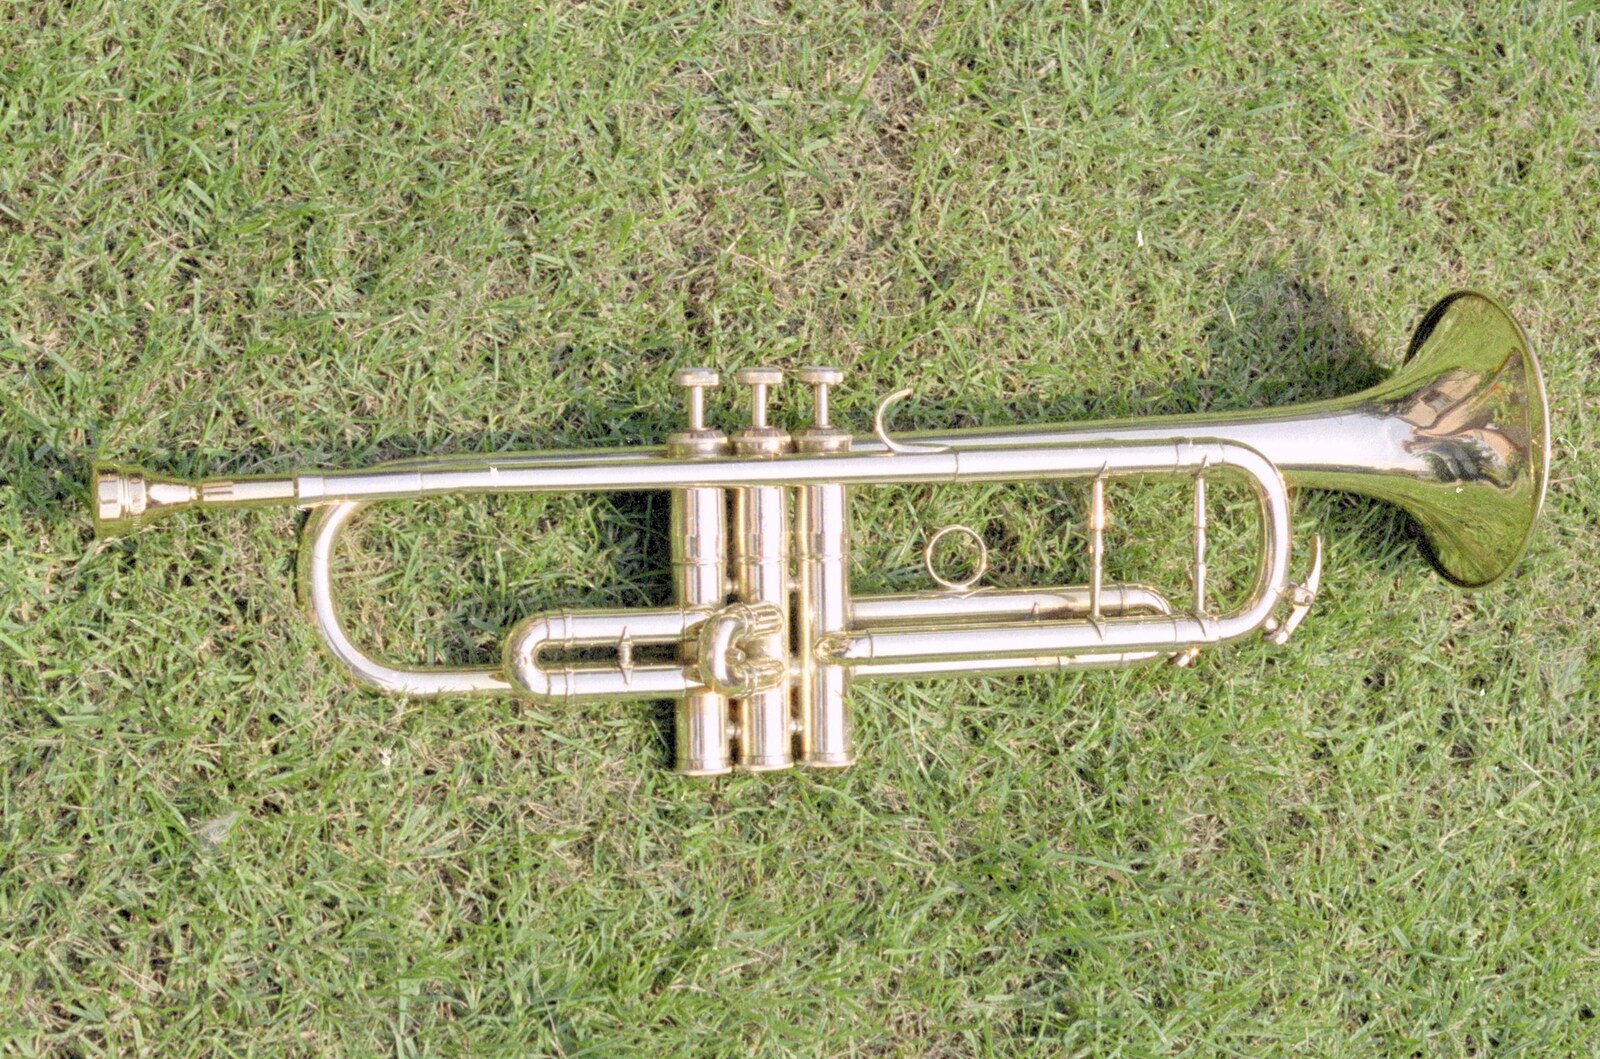 A photo of Badder's chum Sarah's trumpet from Nosher's Dinner Party, Stuston, Suffolk - 14th September 1991